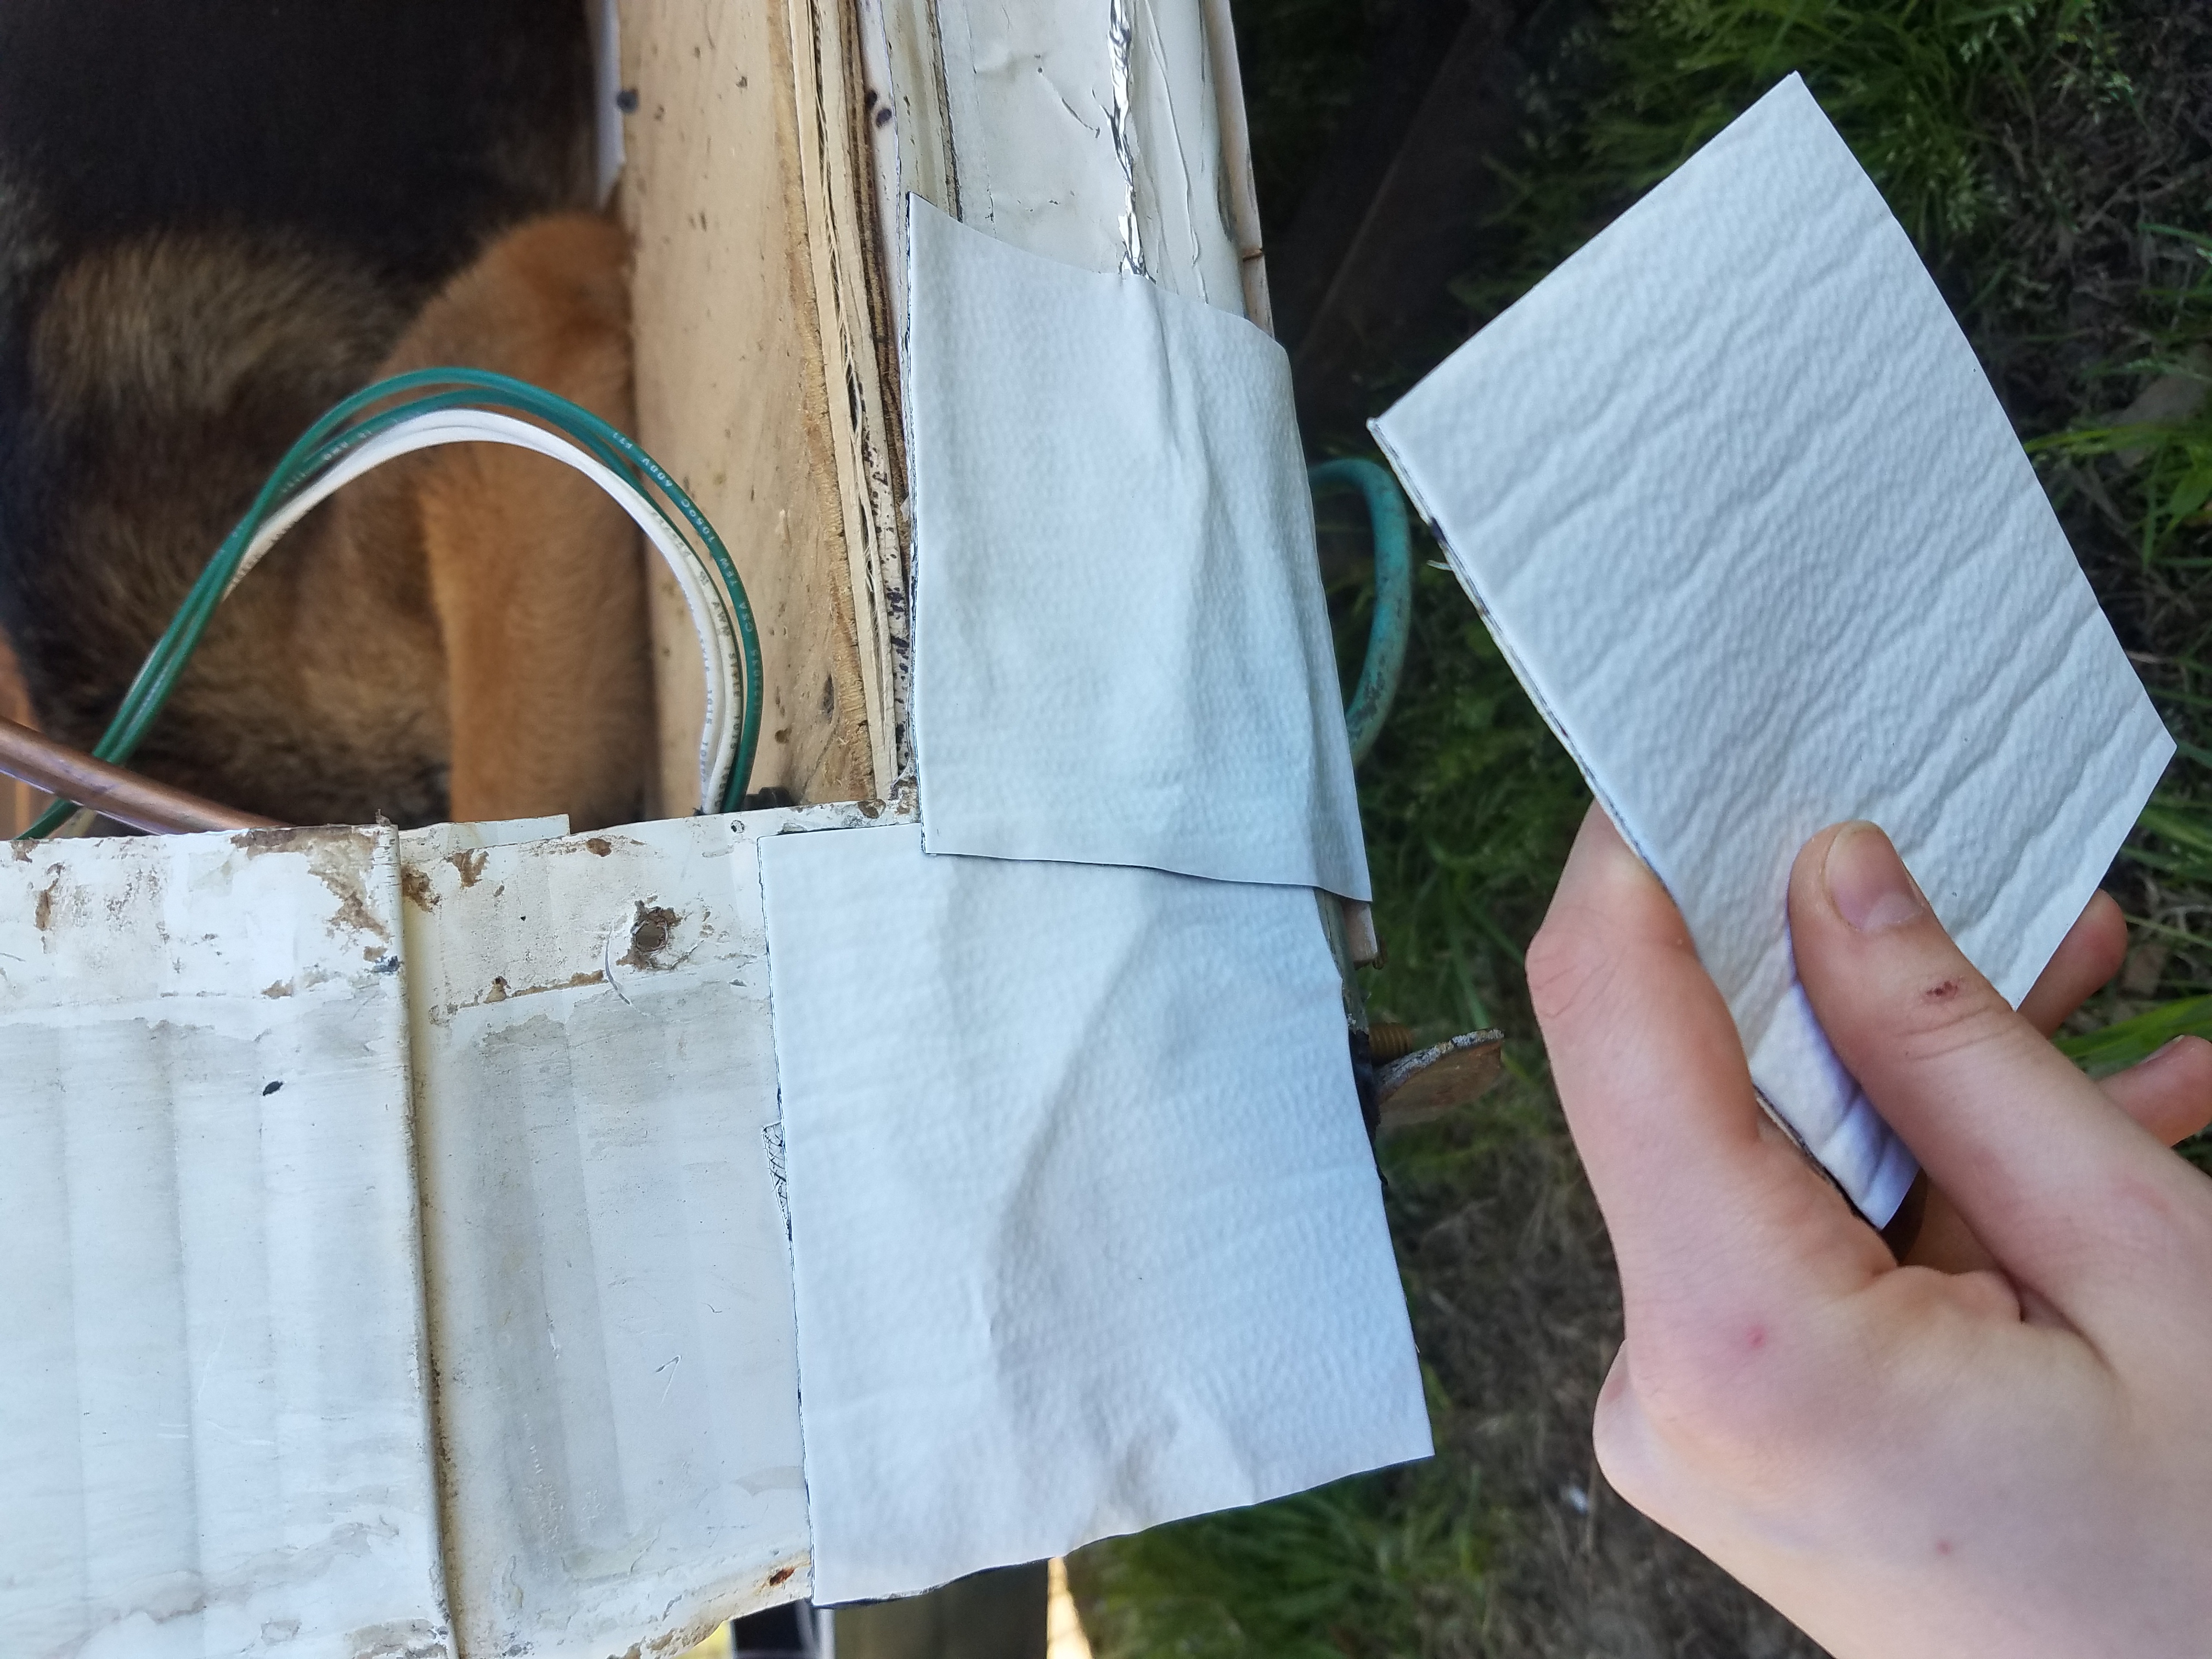 Showing thick tape patches on the aluminum siding